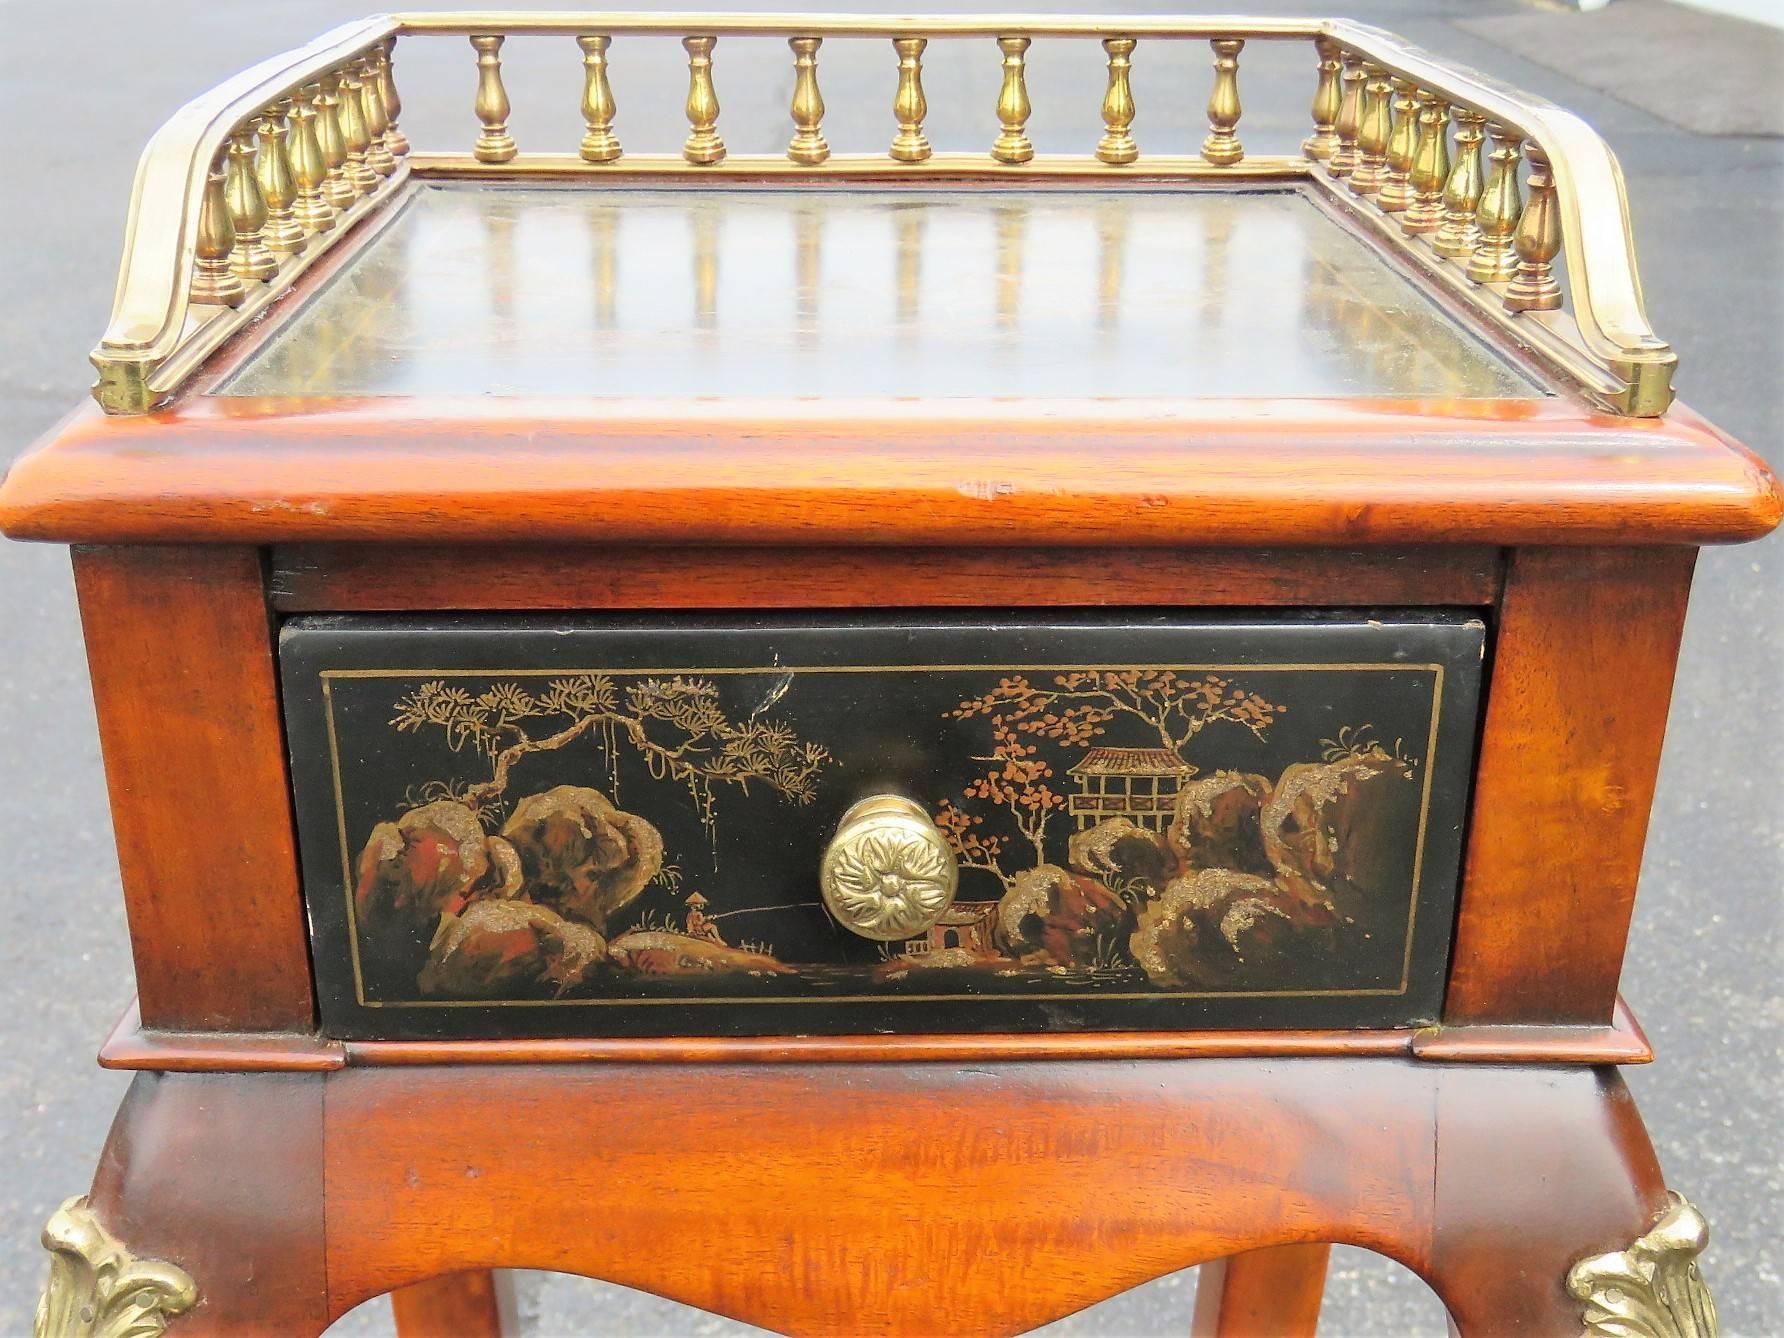 Chinoiserie decoration. Brass galleries and mounts.